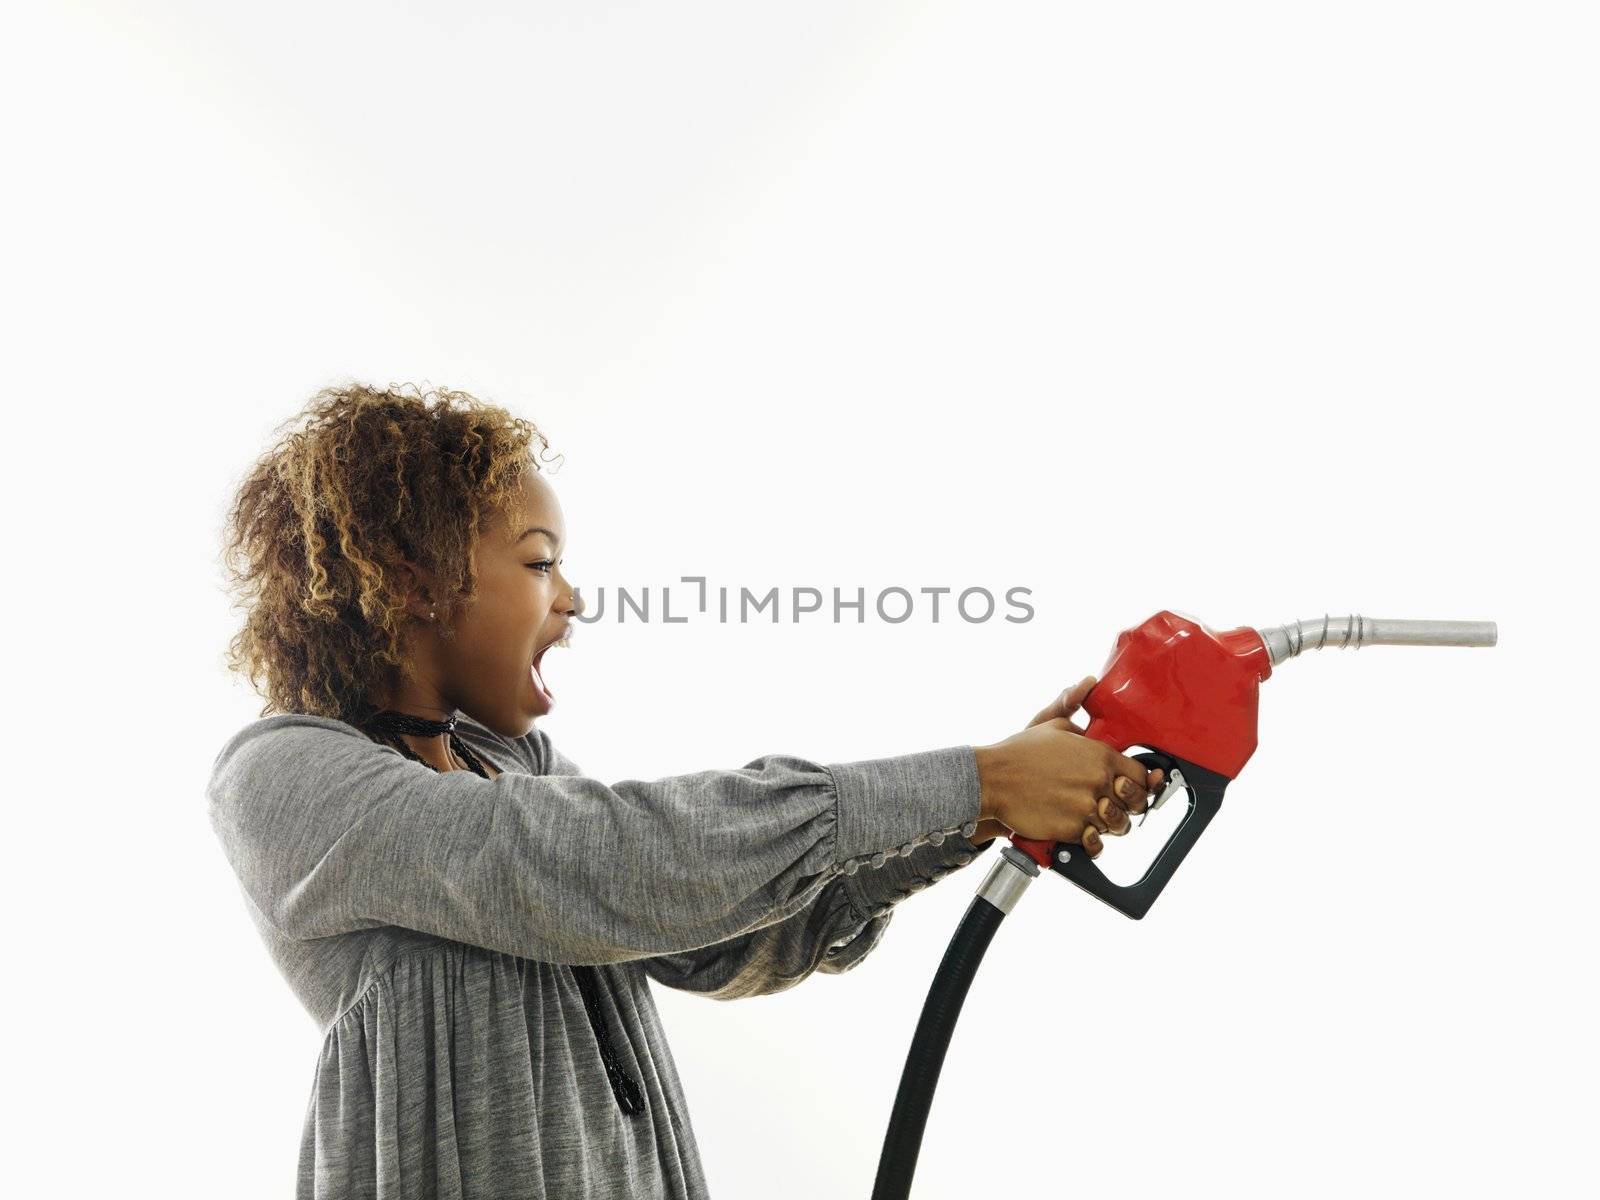 Portrait of pretty young woman holding gas pump nozzle like a gun making angry facial expression on white background.